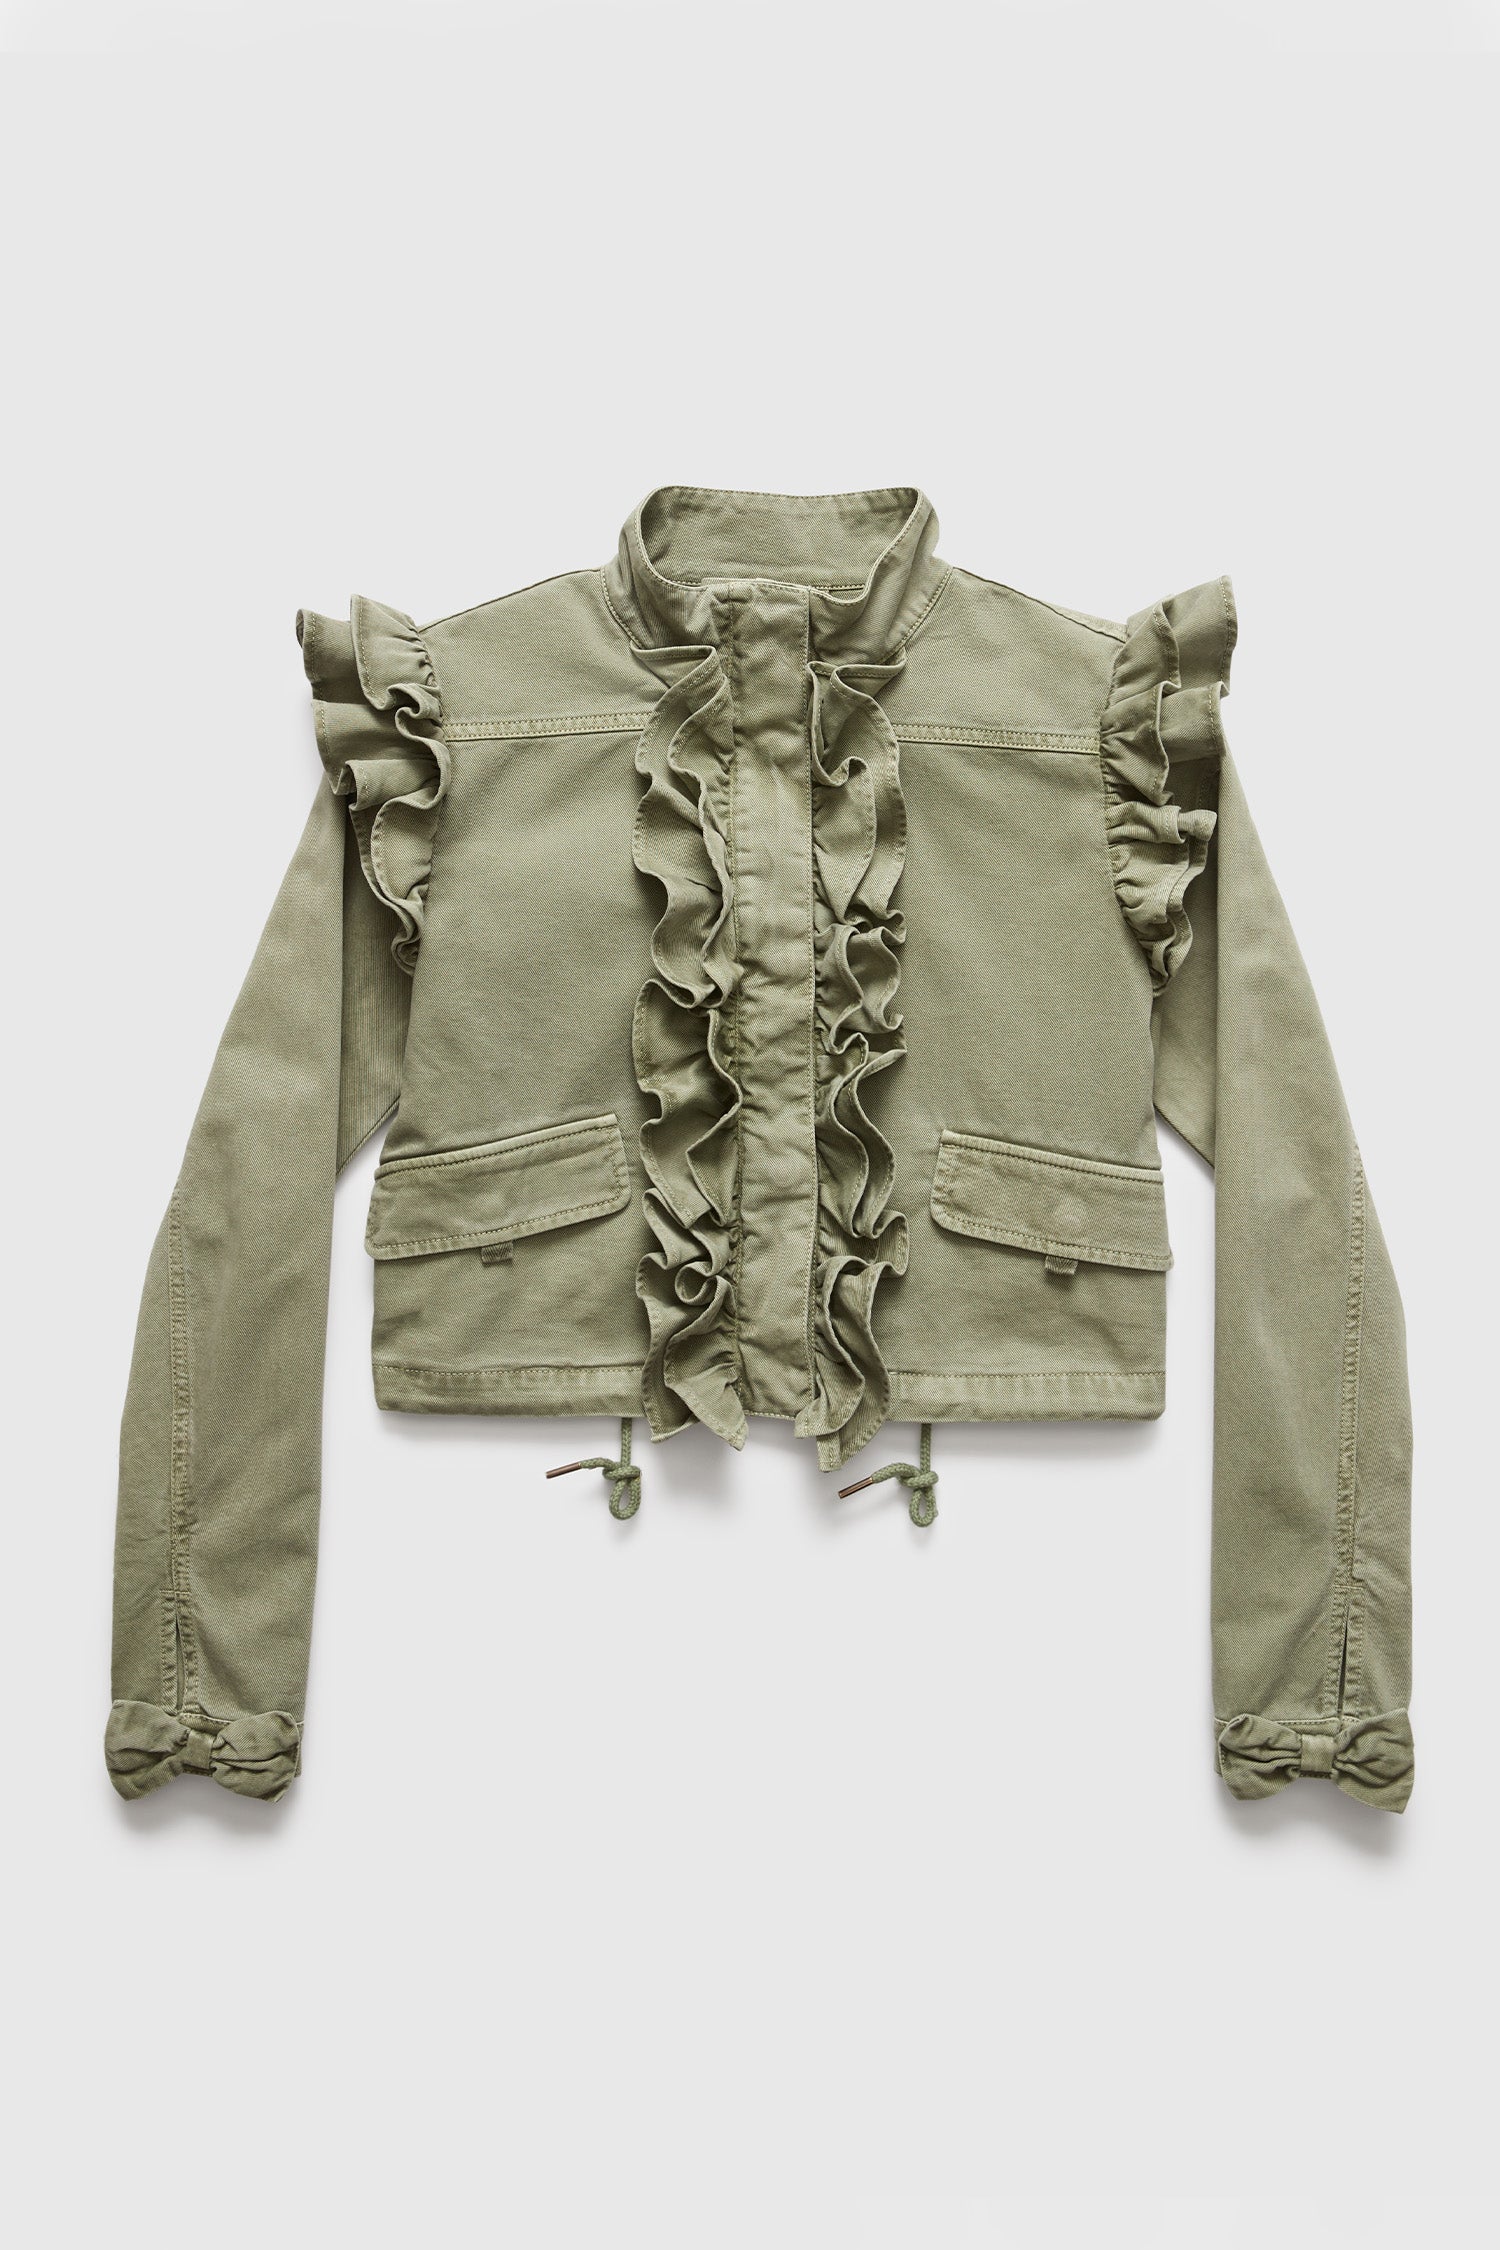 Green crop utility jacket with ruffle detail on shoulders and along zipper. Has front pockets and bows on ends of sleeves. 